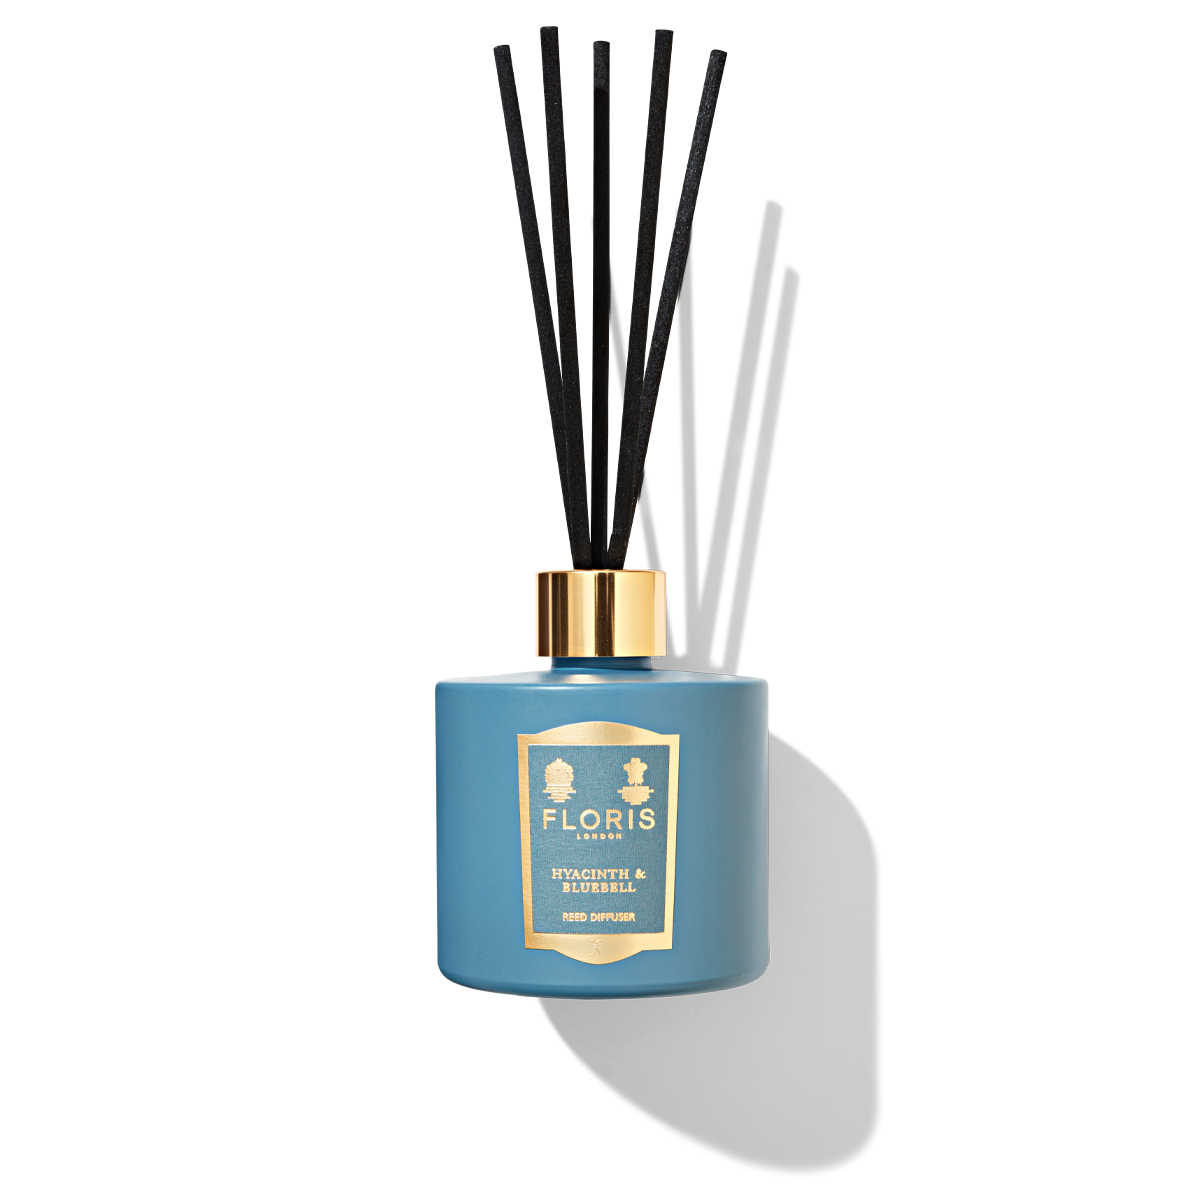 Floris London Hyacinth & Bluebell Reed Diffuser bottle with black reeds